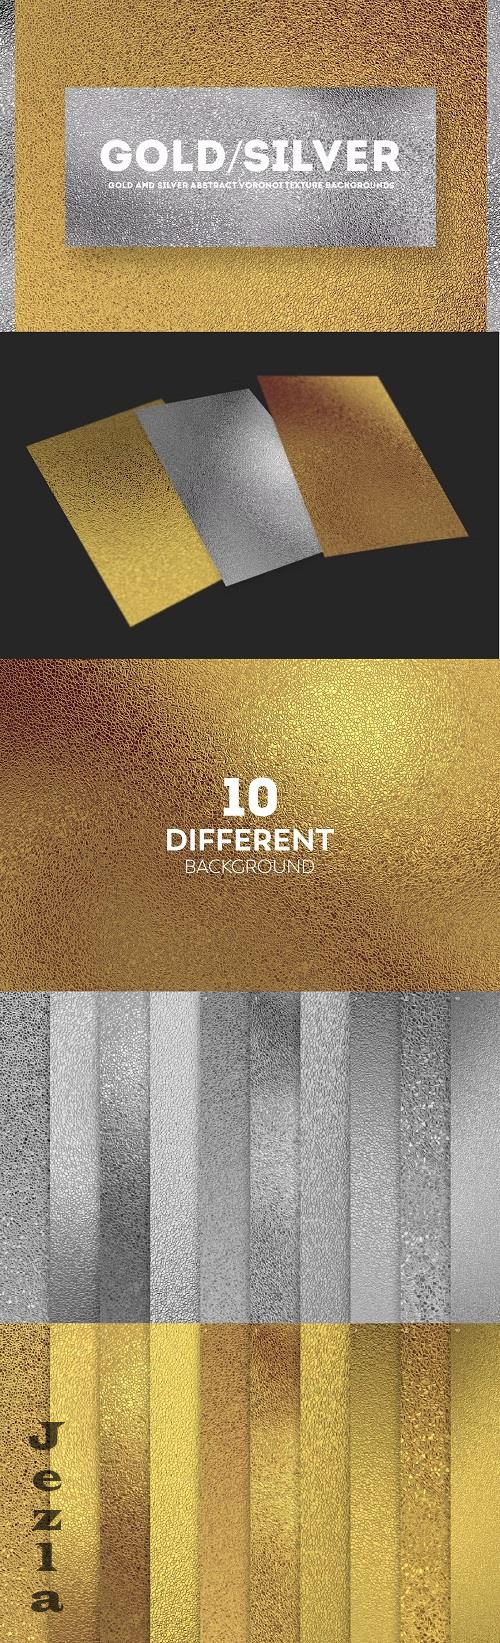 Gold & Silver Abstract Voronoi Texture Backgrounds - RW9T4M6